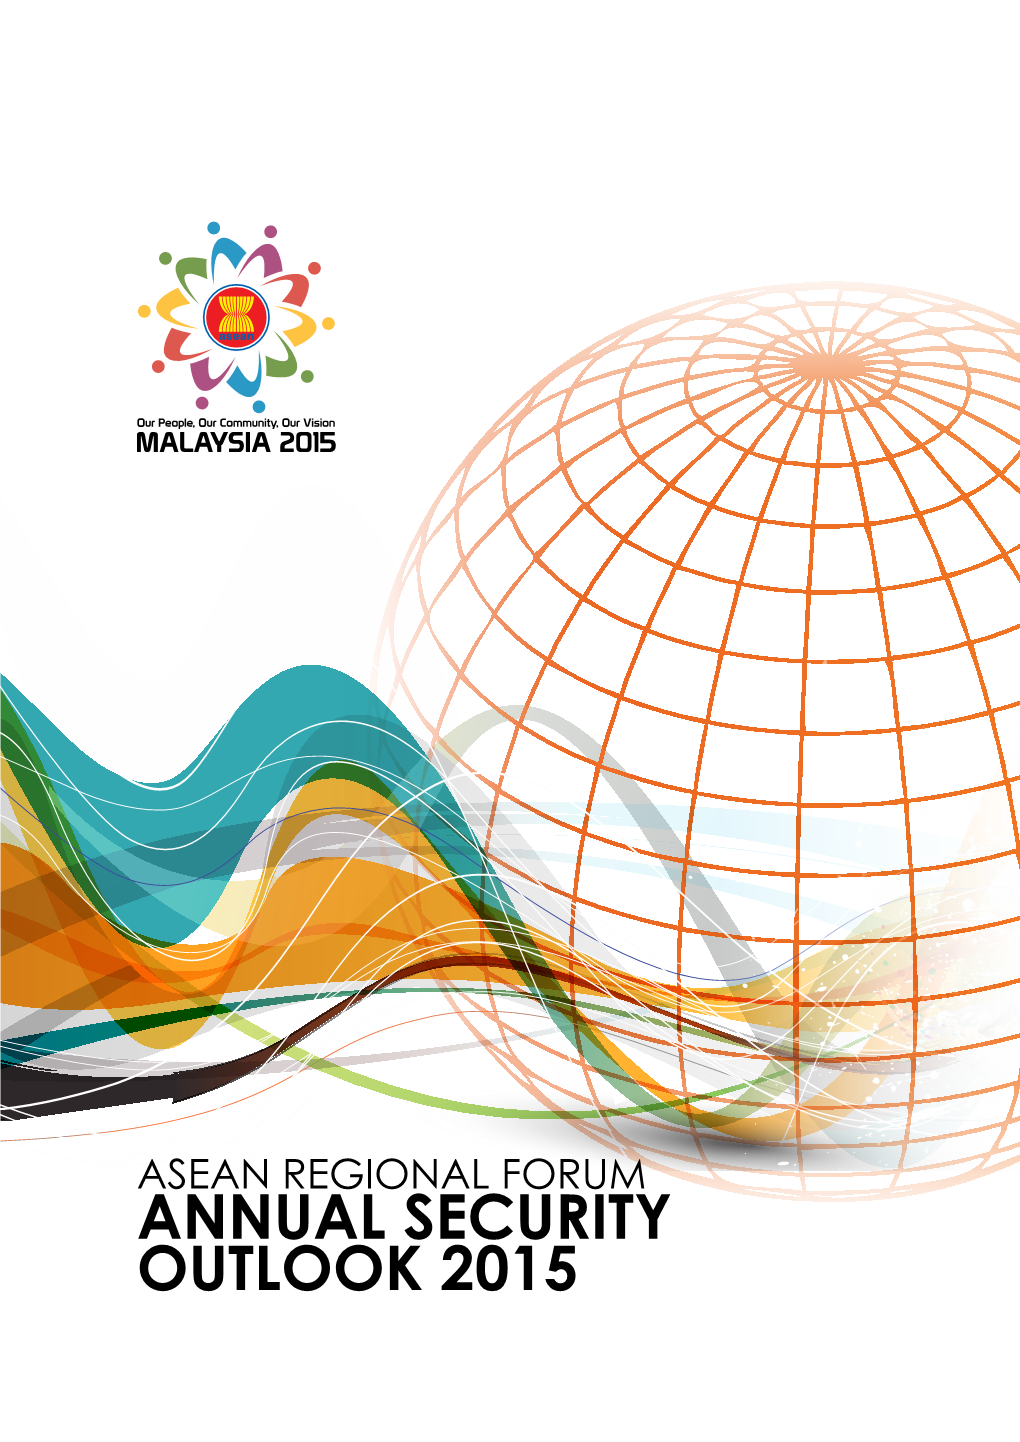 ARF Annual Security Outlook 2015, Comprising 19 Contributions by Members of the ARF